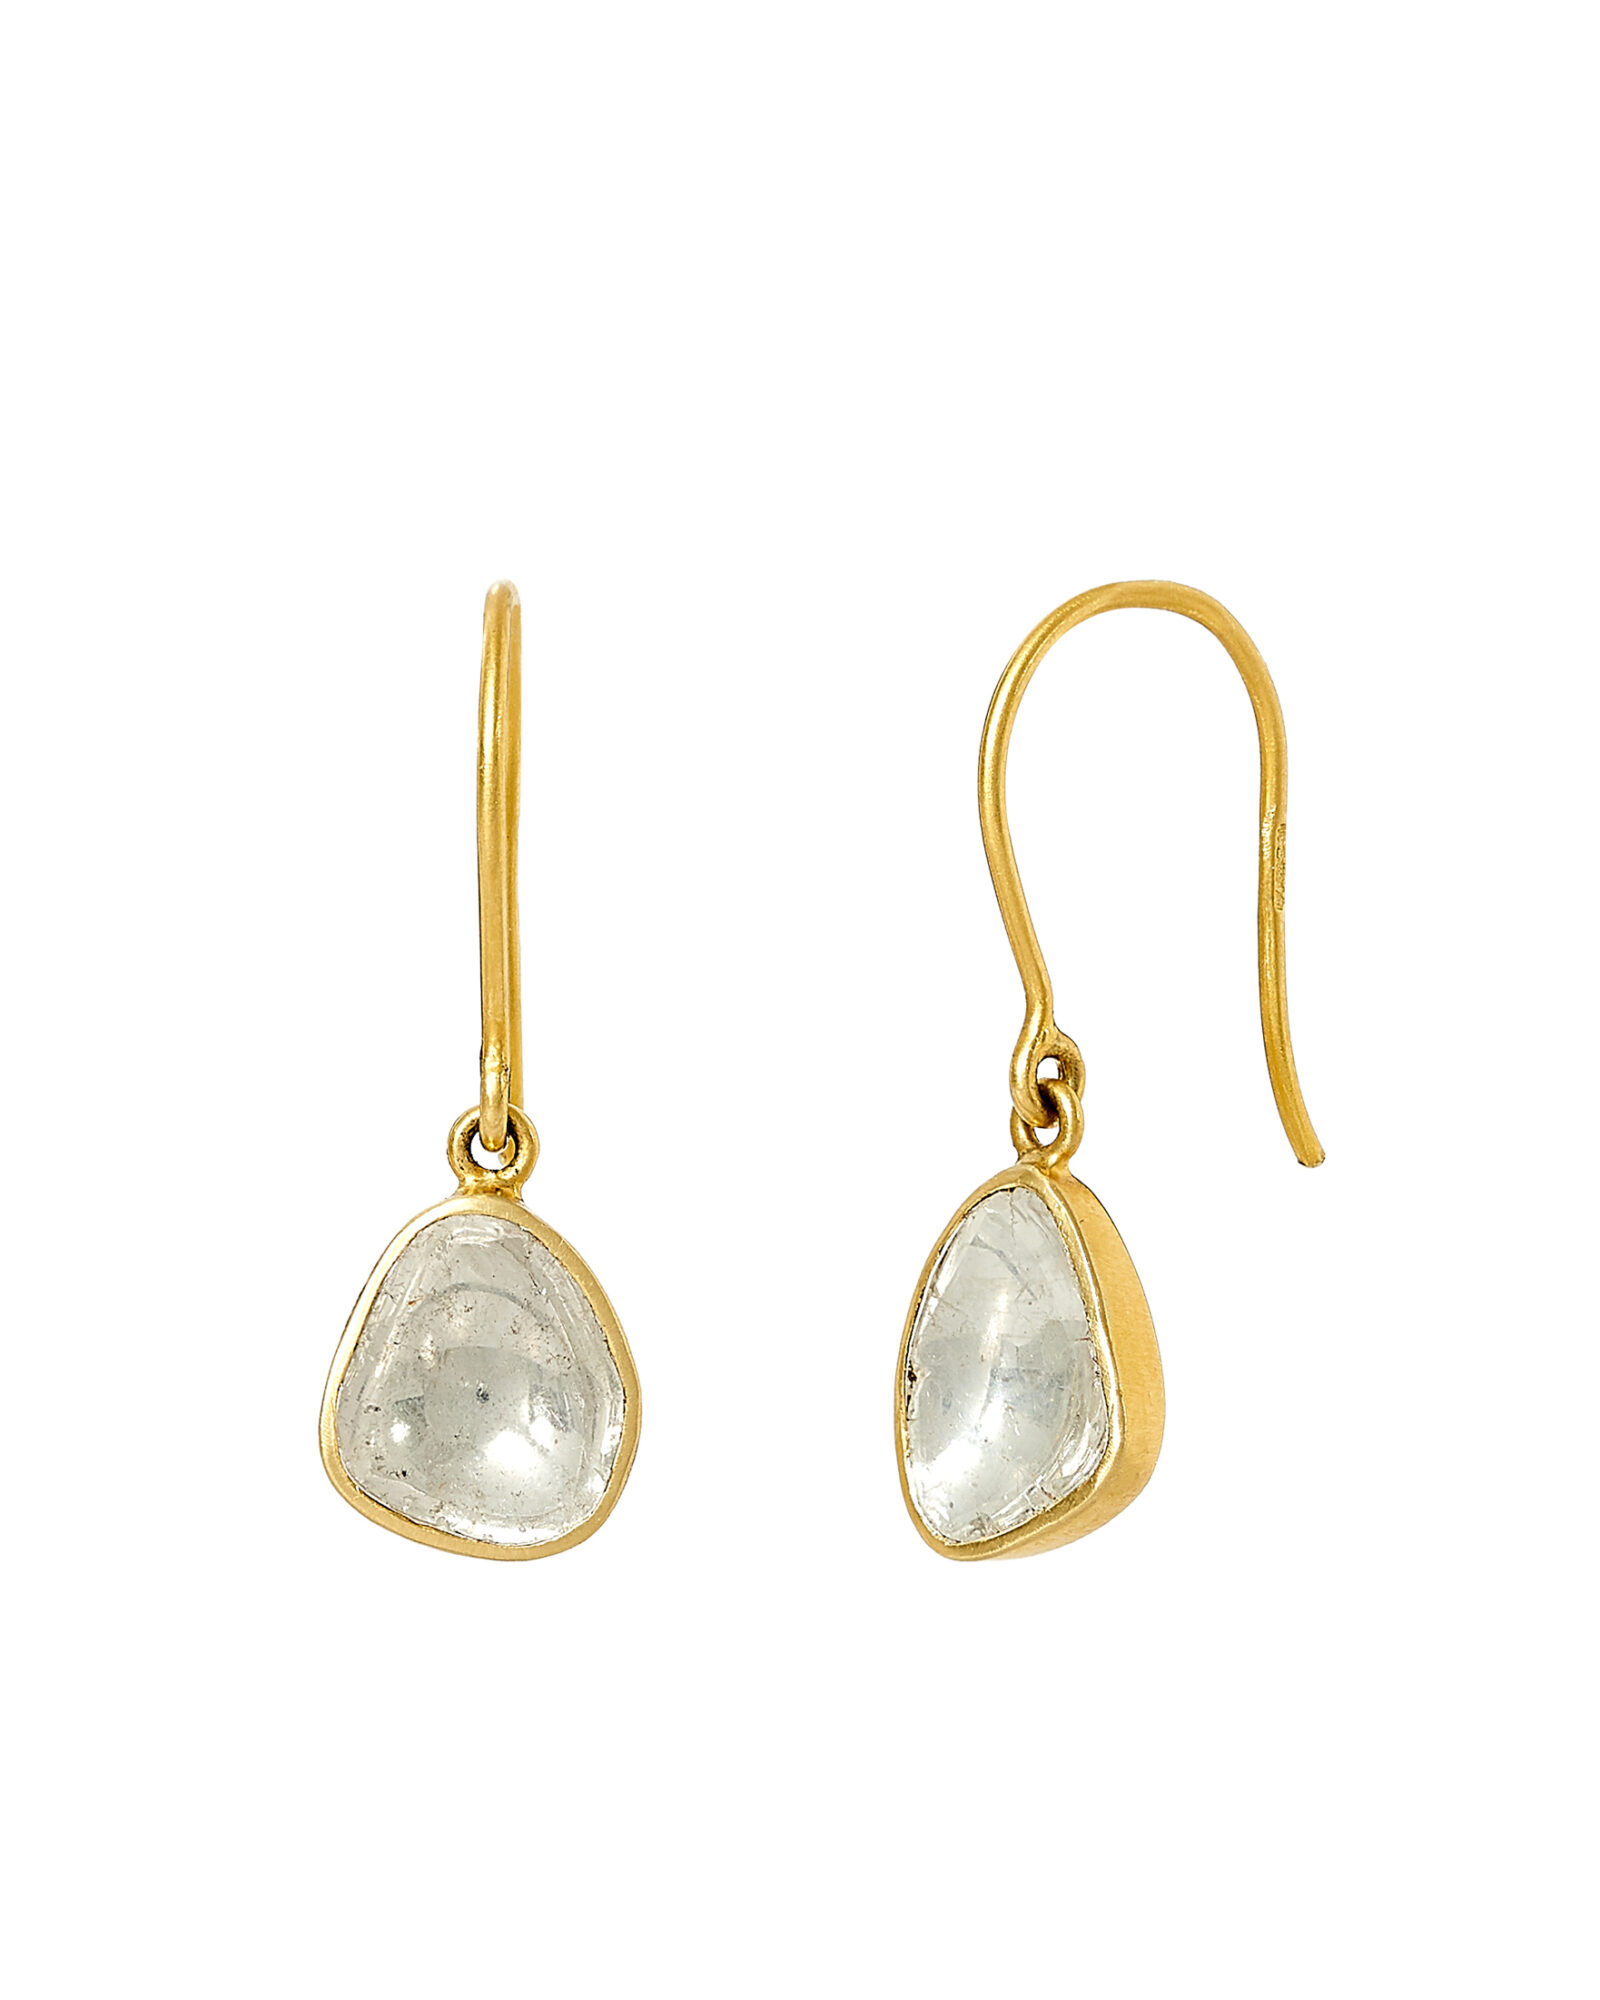 sustainable jewelry designer gold and diamond earrings